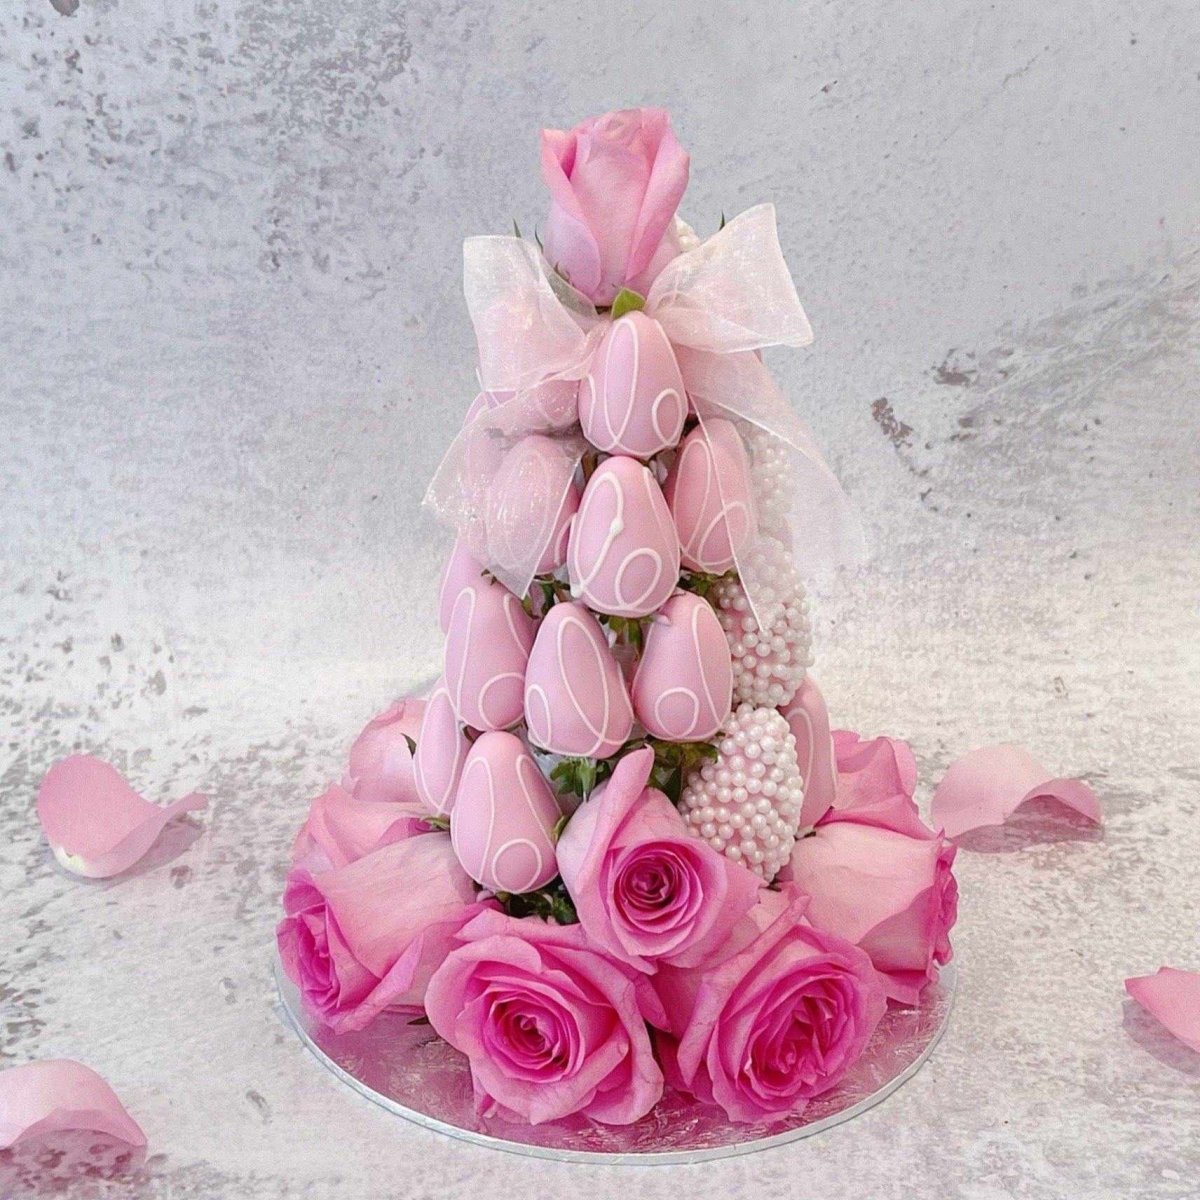 Blessed Love Strawberry Tower - Rainbowly Fresh Fruit Gift and Flower Arrangments